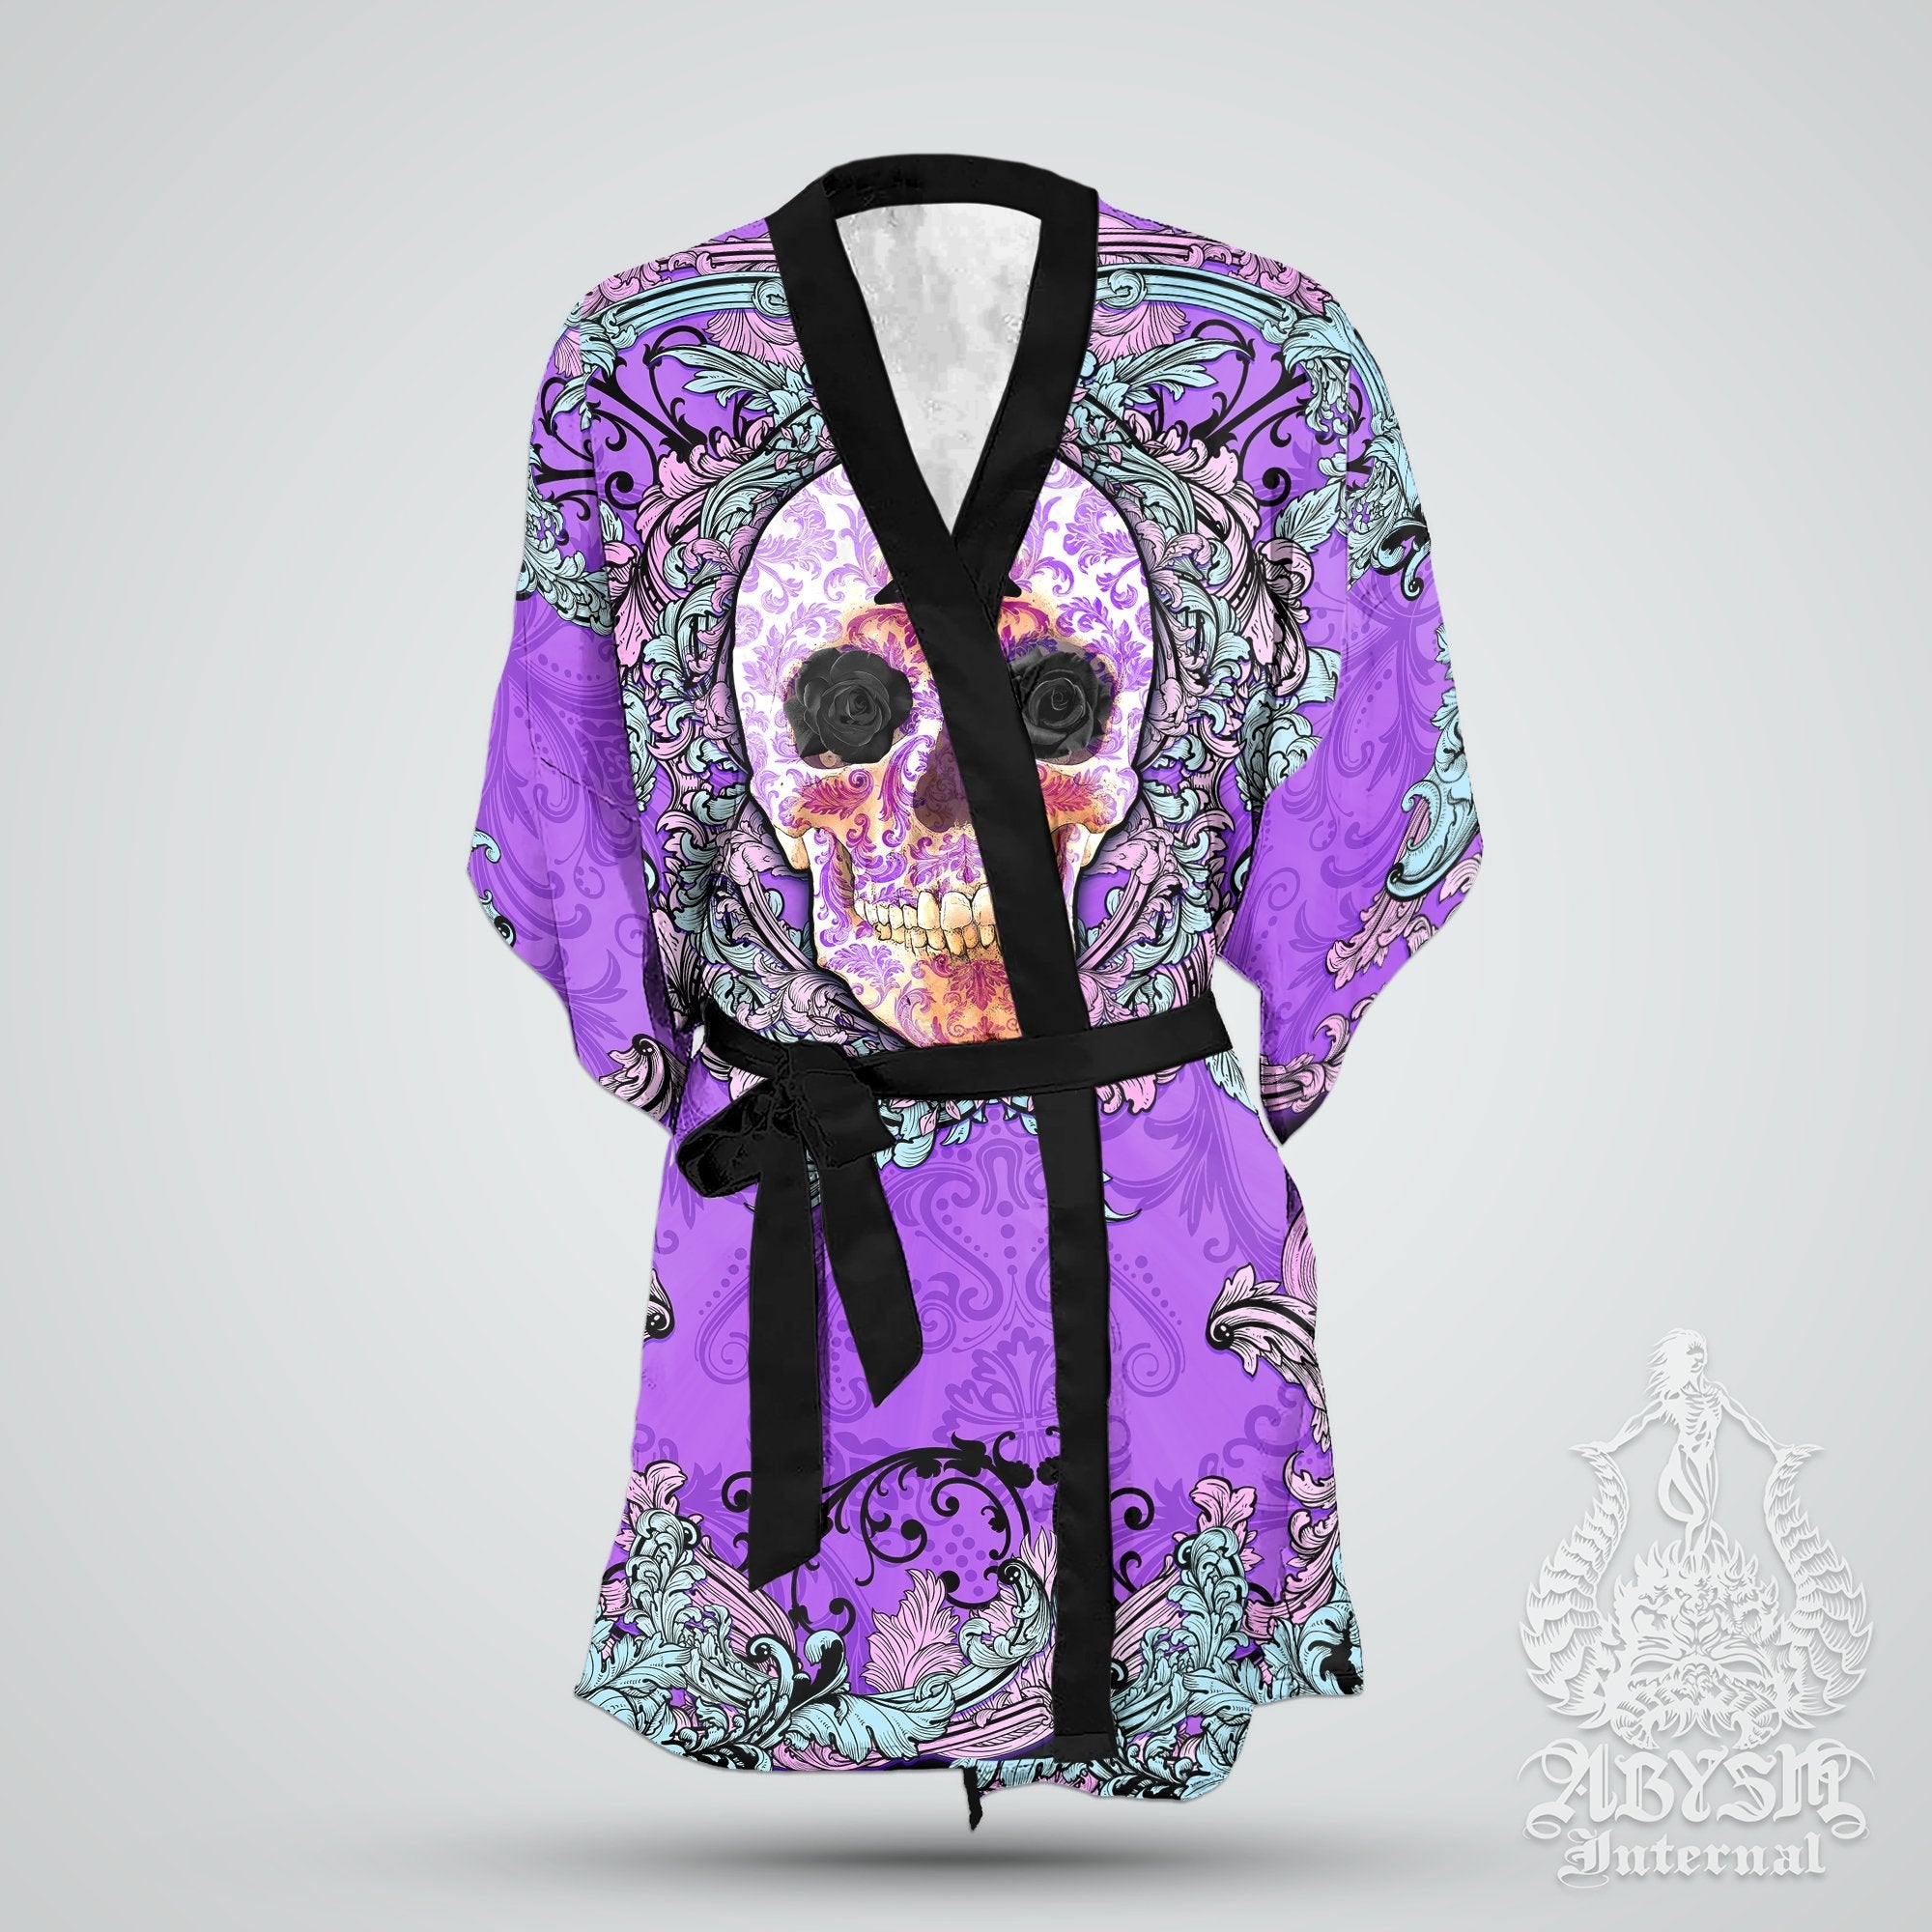 Skull Cover Up, Beach Outfit, Party Kimono, Summer Festival Robe, Gothic Indie and Alternative Clothing, Unisex - Pastel Goth - Abysm Internal